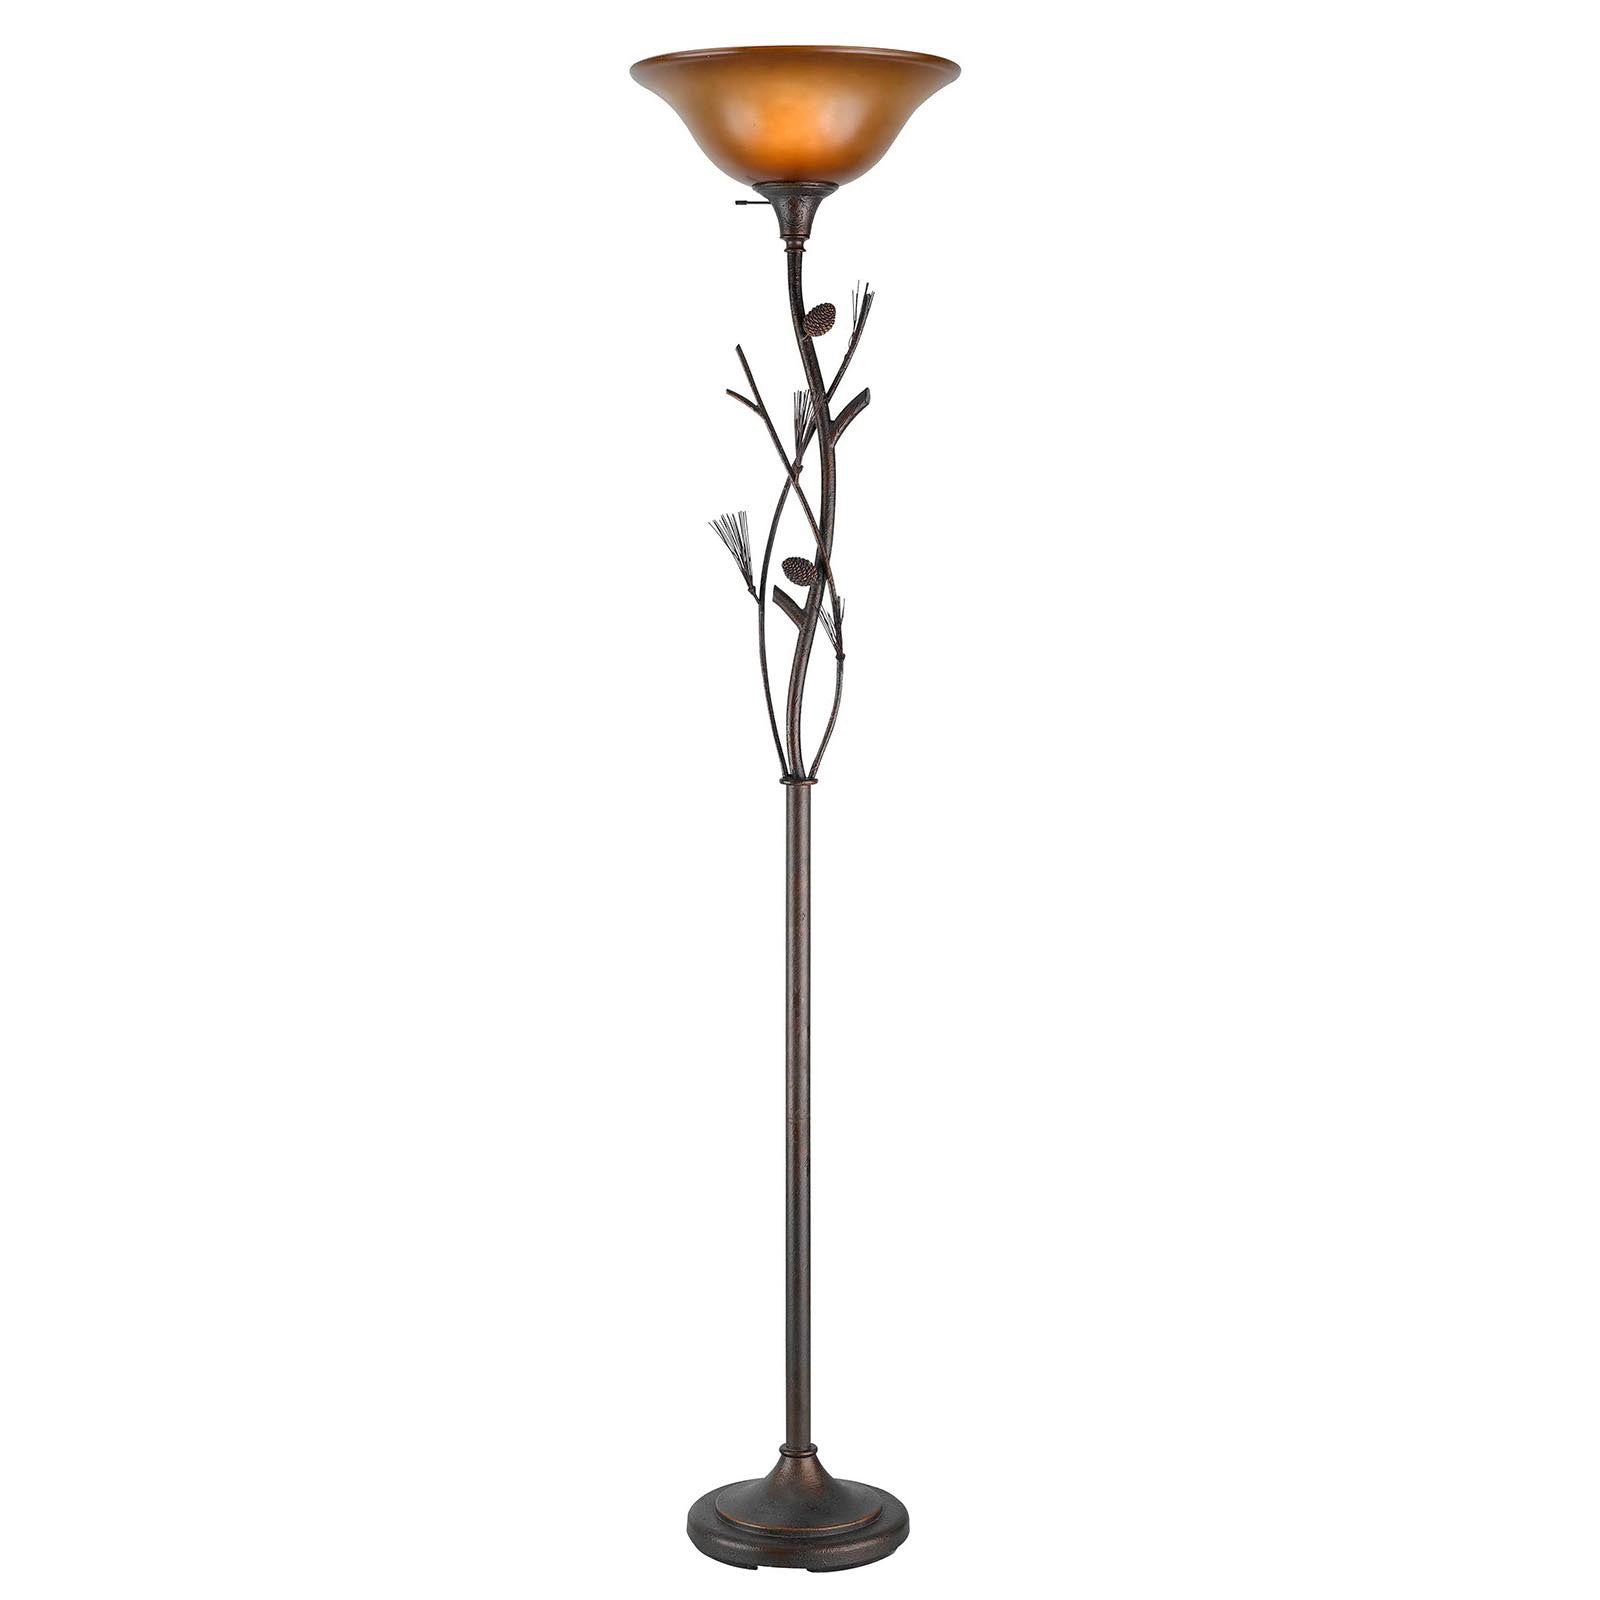 72" Rusted Torchiere Floor Lamp With Brown Frosted Glass Dome Shade